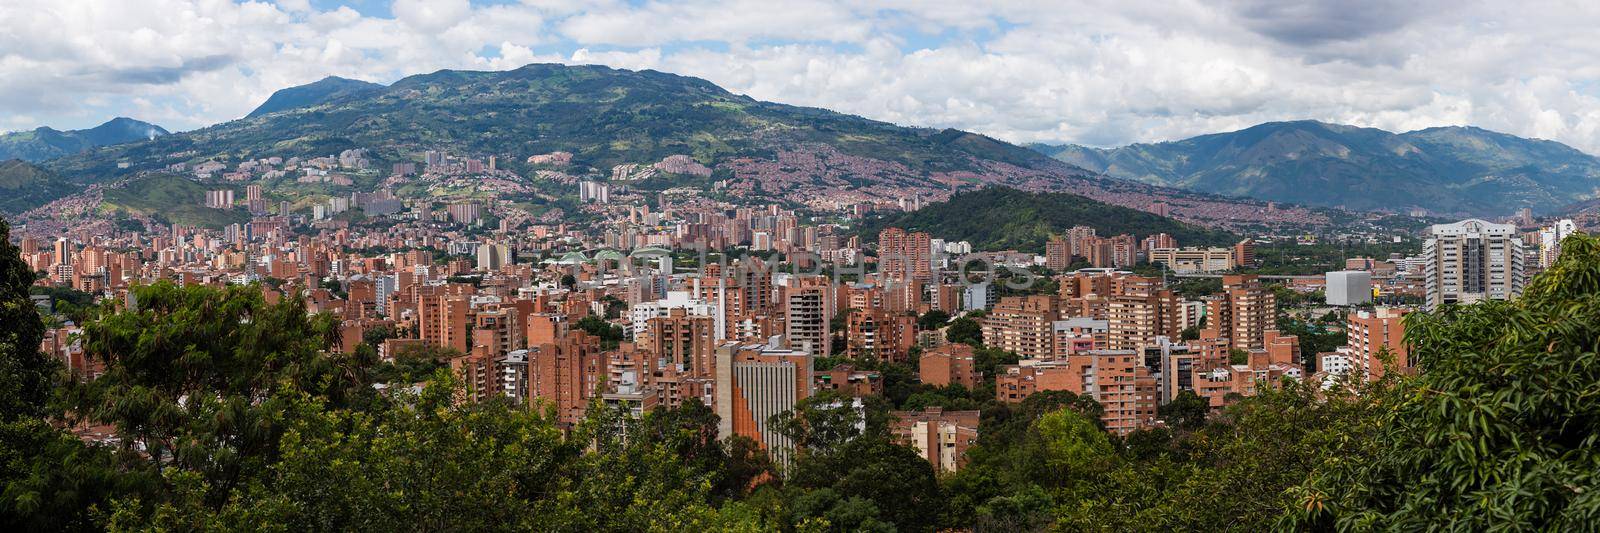 Rolling hills of homes in Bogota Colombia. Panoramic view by jyurinko